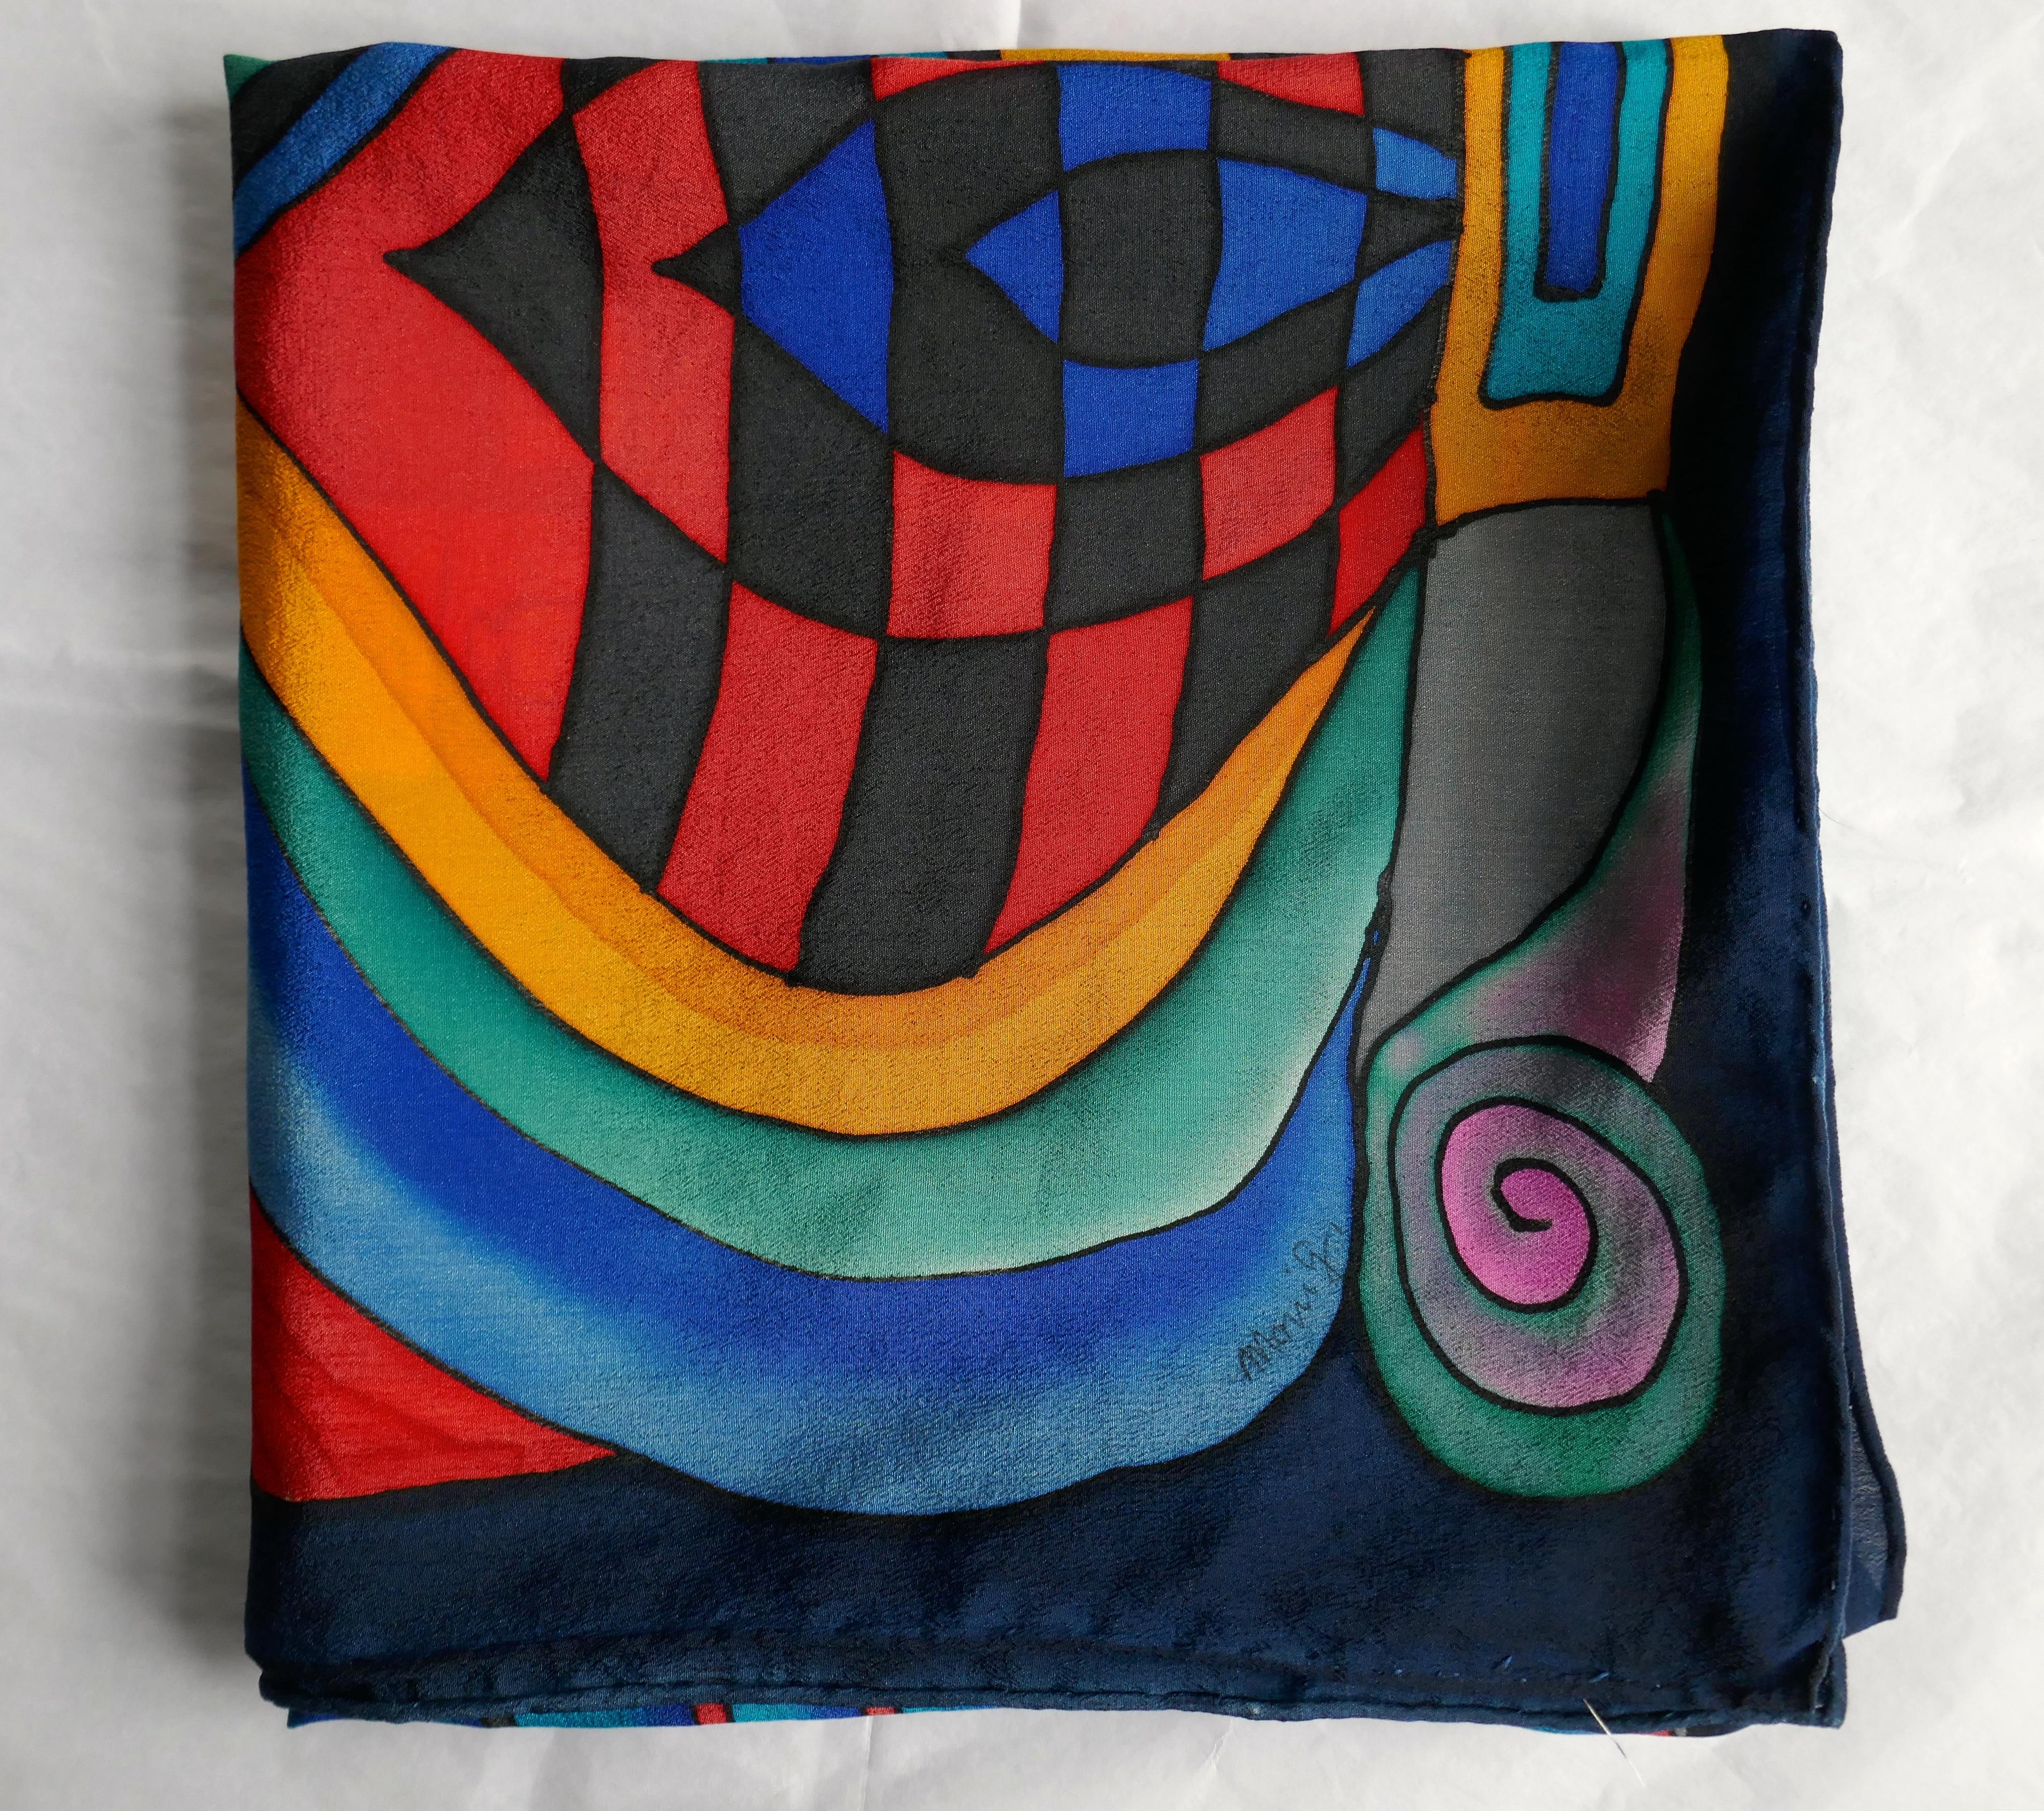 1960s Ideen Vintage Retro Silk Scarf, Psychedelic Vibrant Abstract design by Monique

Vibrant a Classic of its time
100% silk 
Silk Crêpe de Chine
Measures 34”x 34”

Vintage good condition 
F99